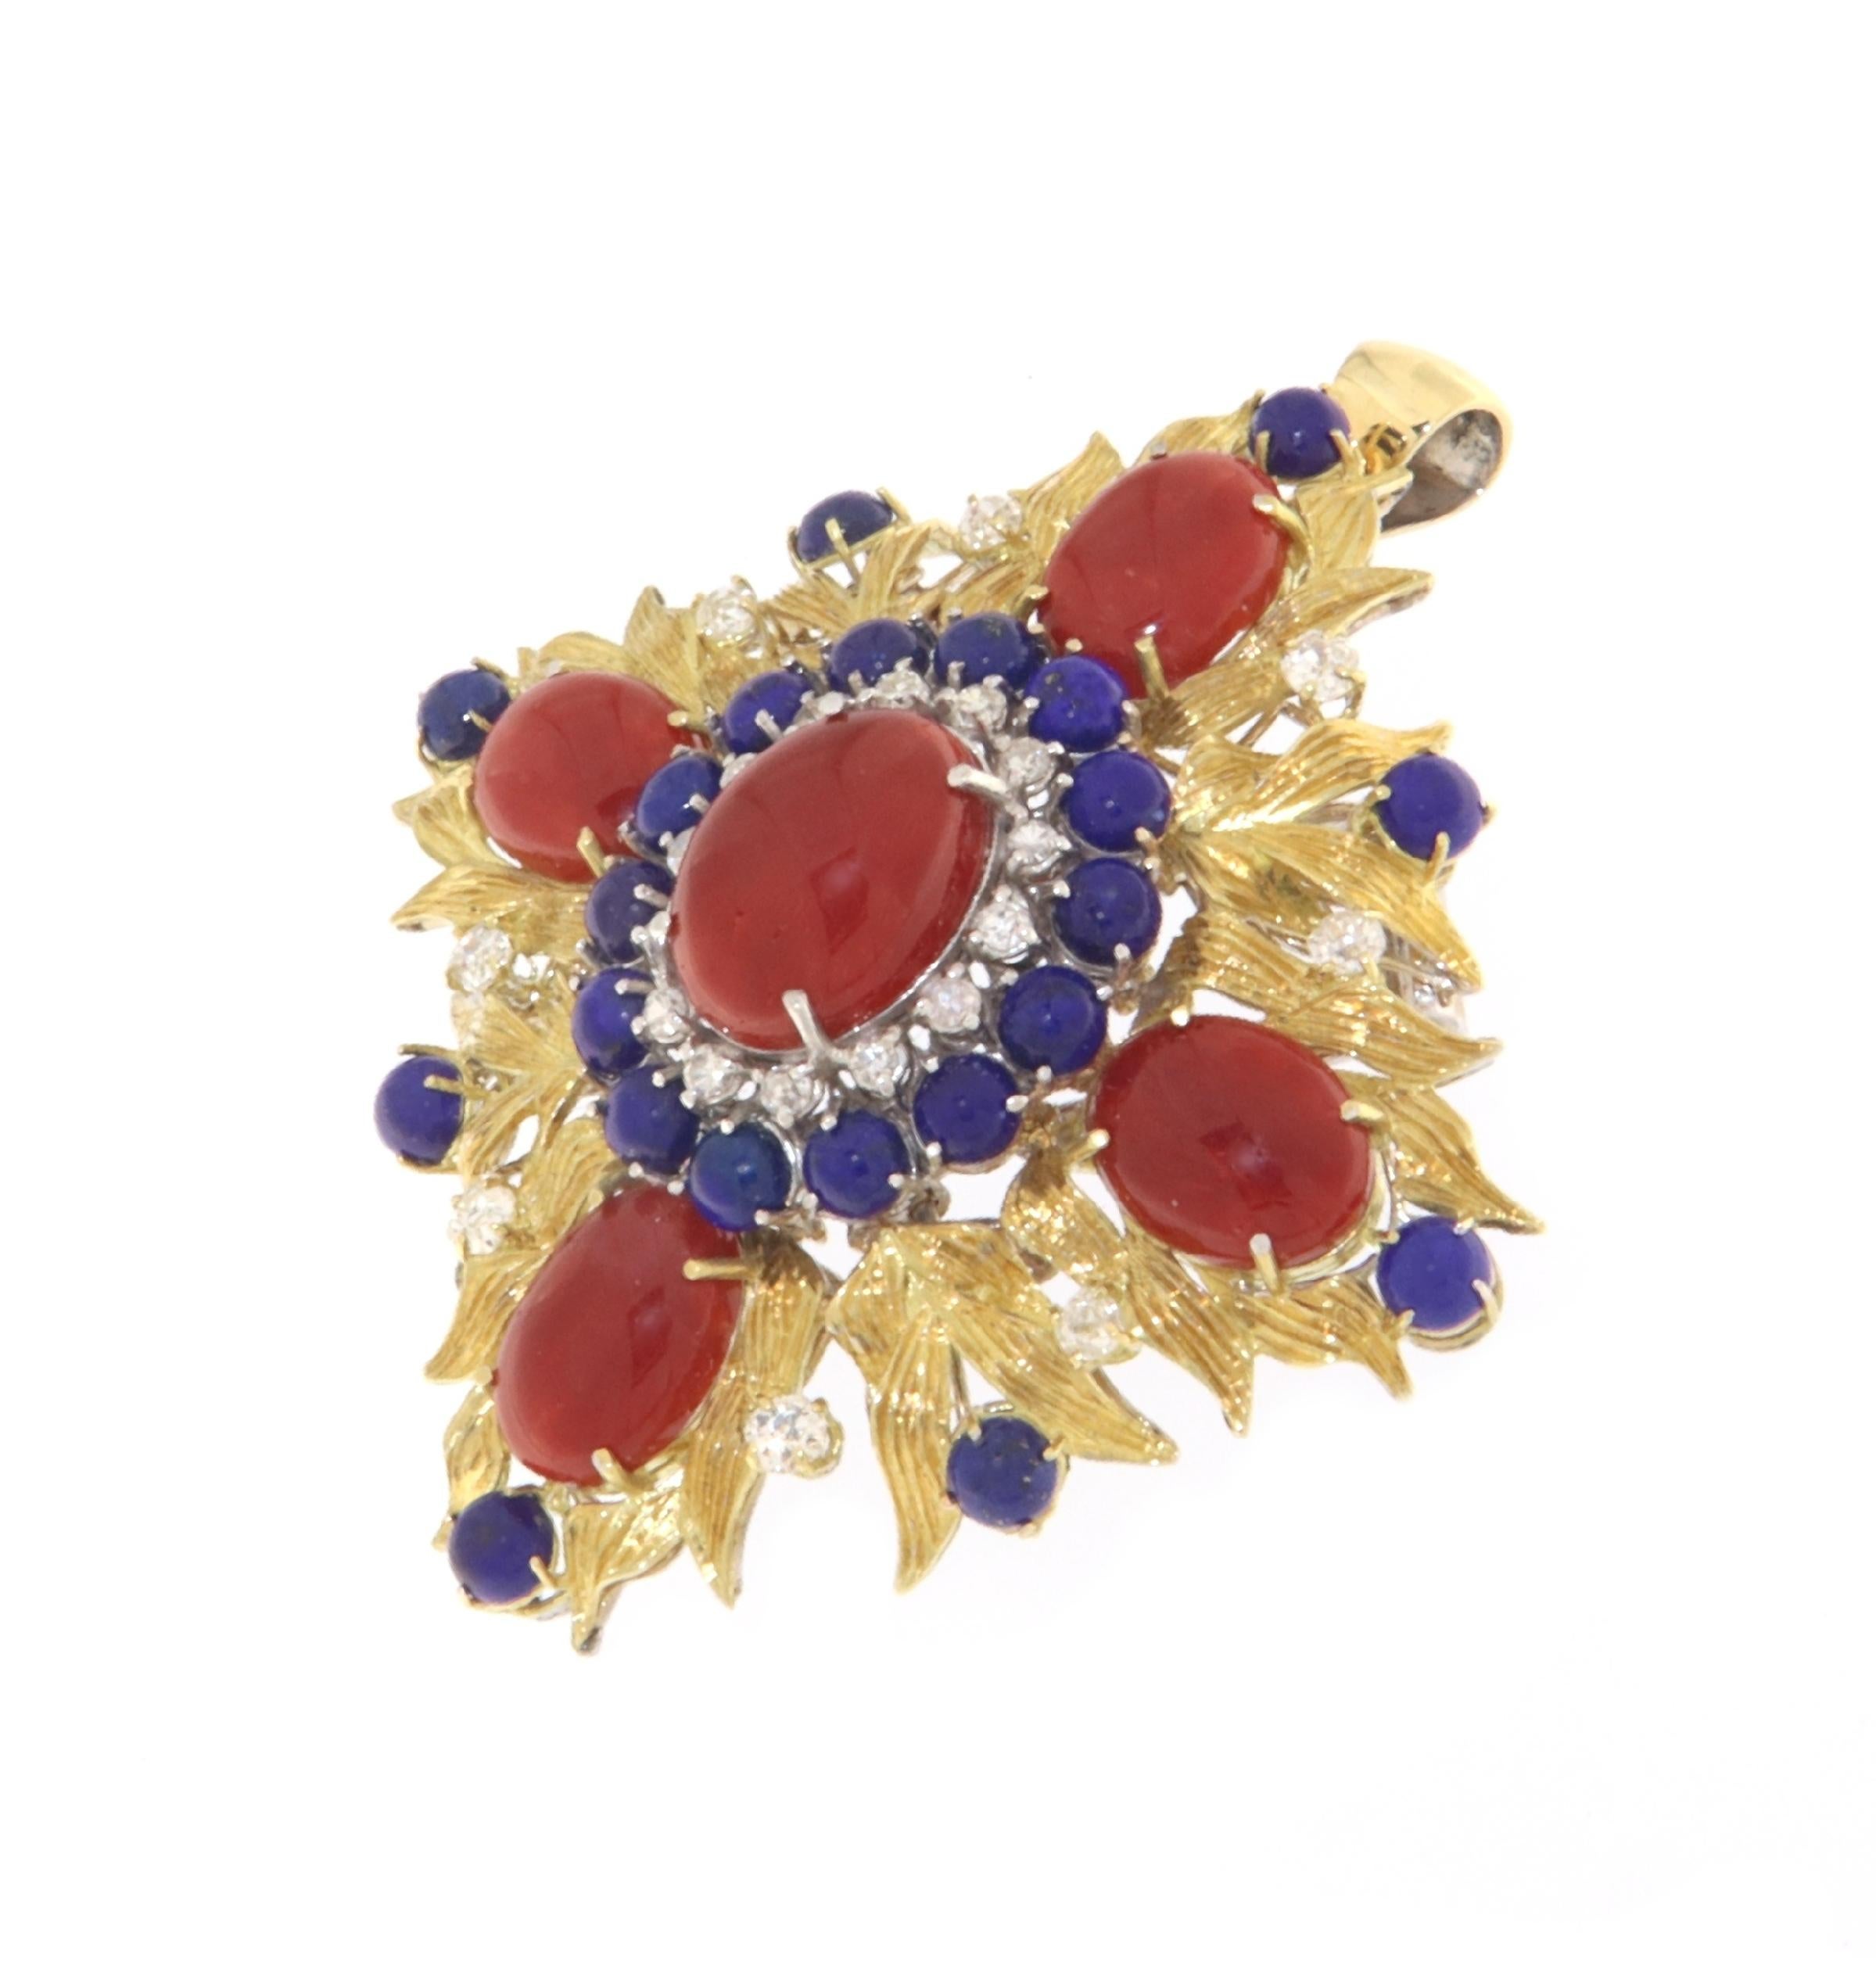 This exquisite brooch/pendant is a wearable piece of art that reflects the opulence and elegance of a blend of precious stones and metals. Crafted in a harmonious mix of 18 karat yellow and white gold, the piece showcases a radiant and lavish design